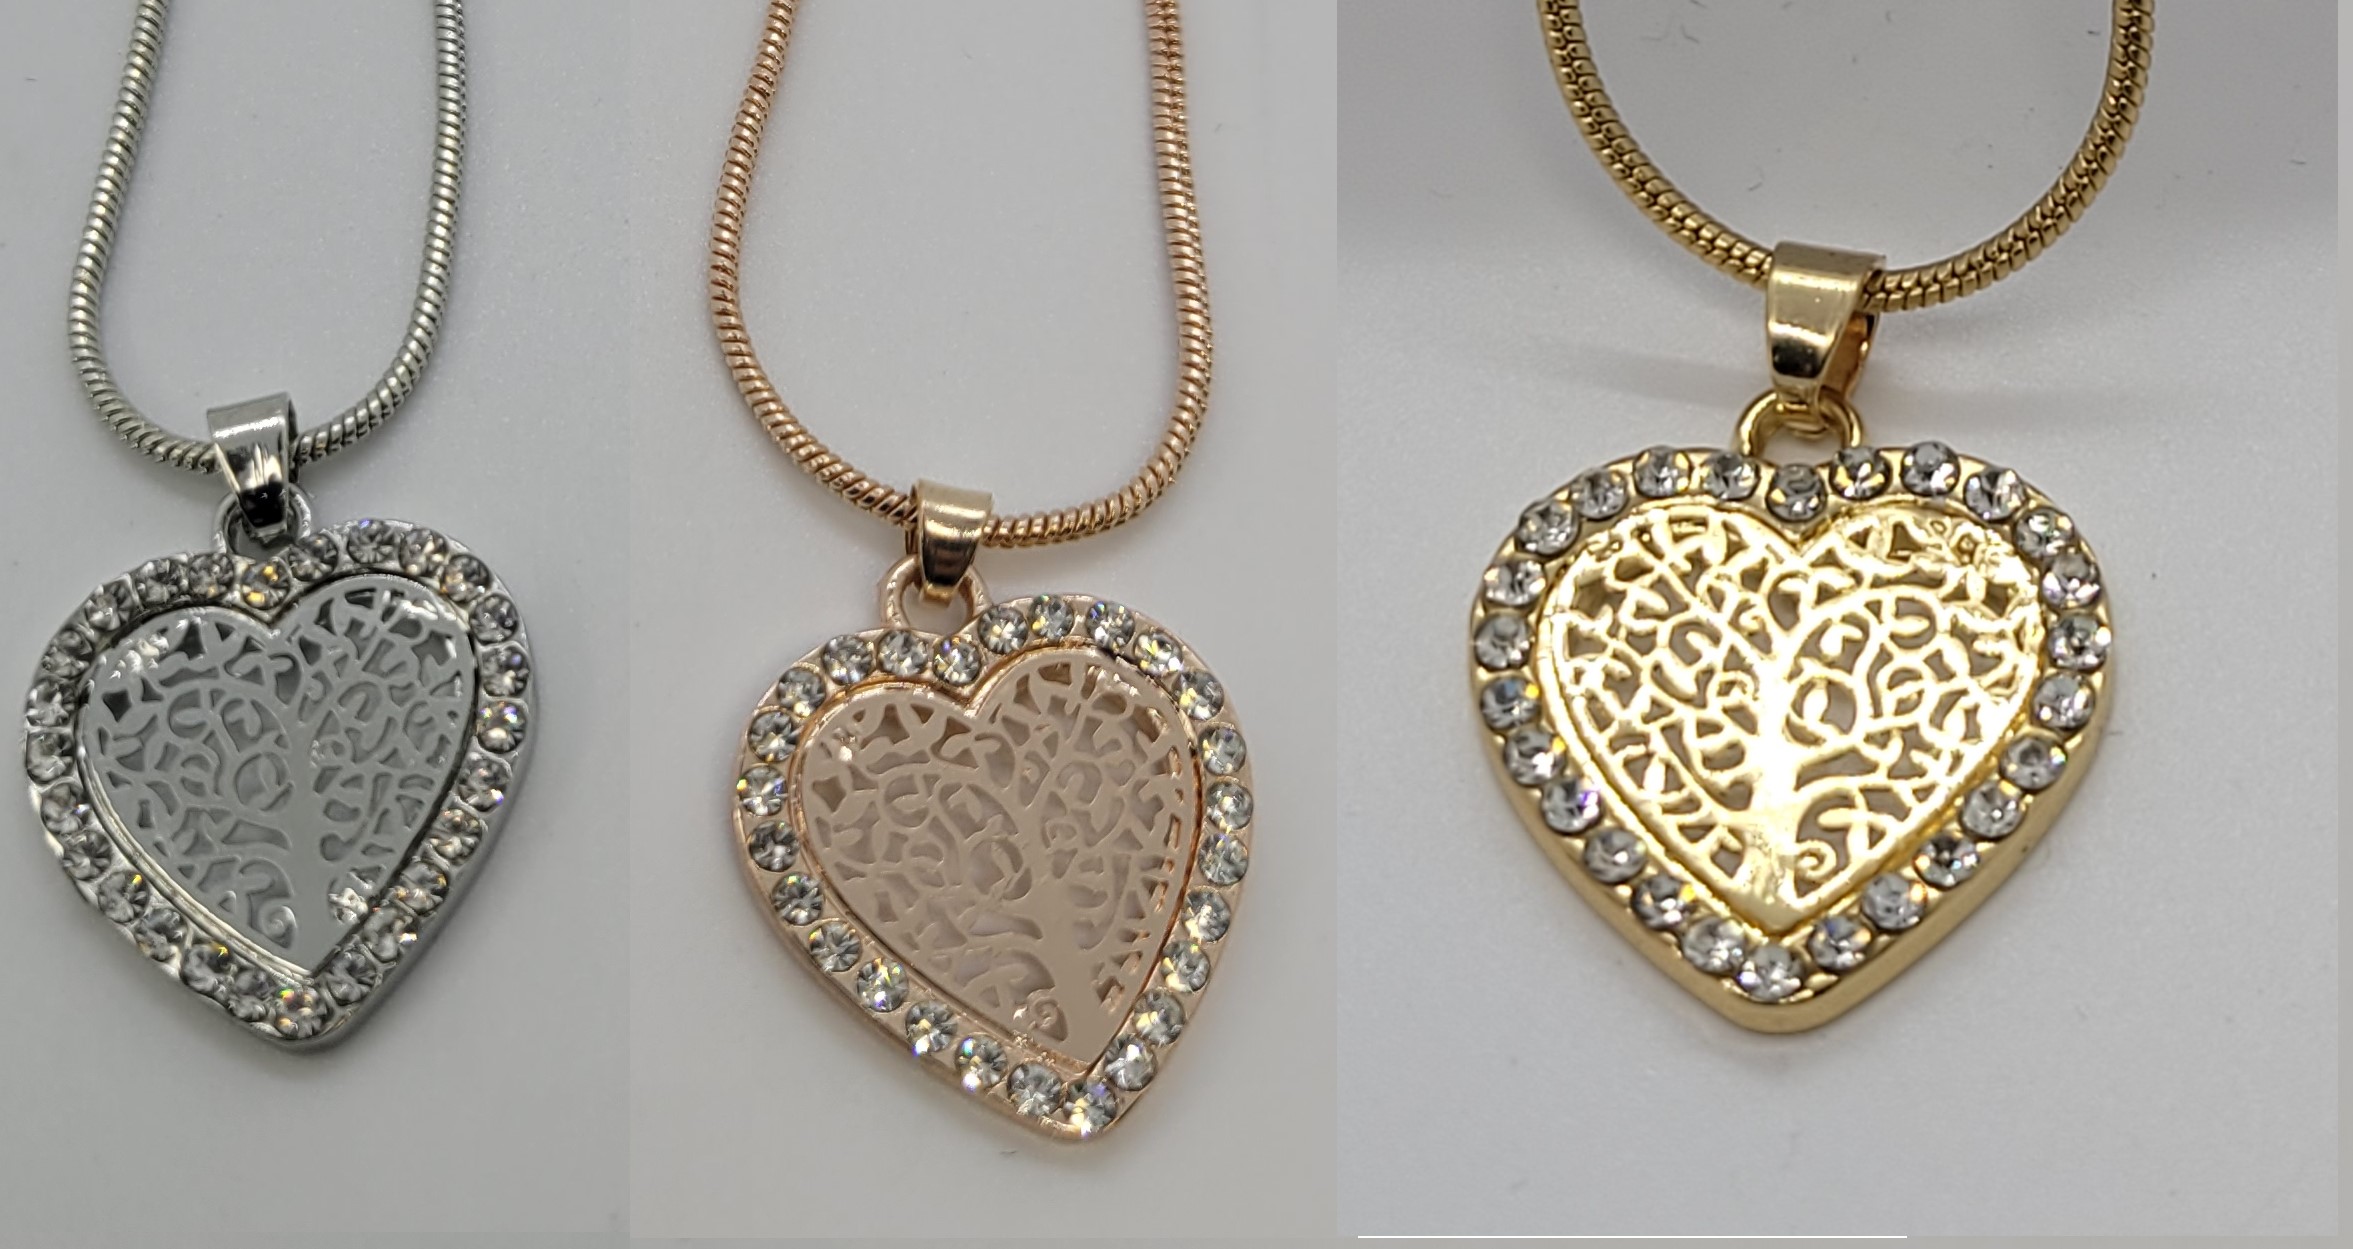 12pc_Family Tree Heart Crystal Necklace-Gold, Rose Gold or Silver_UK Seller_GCJ198Variable